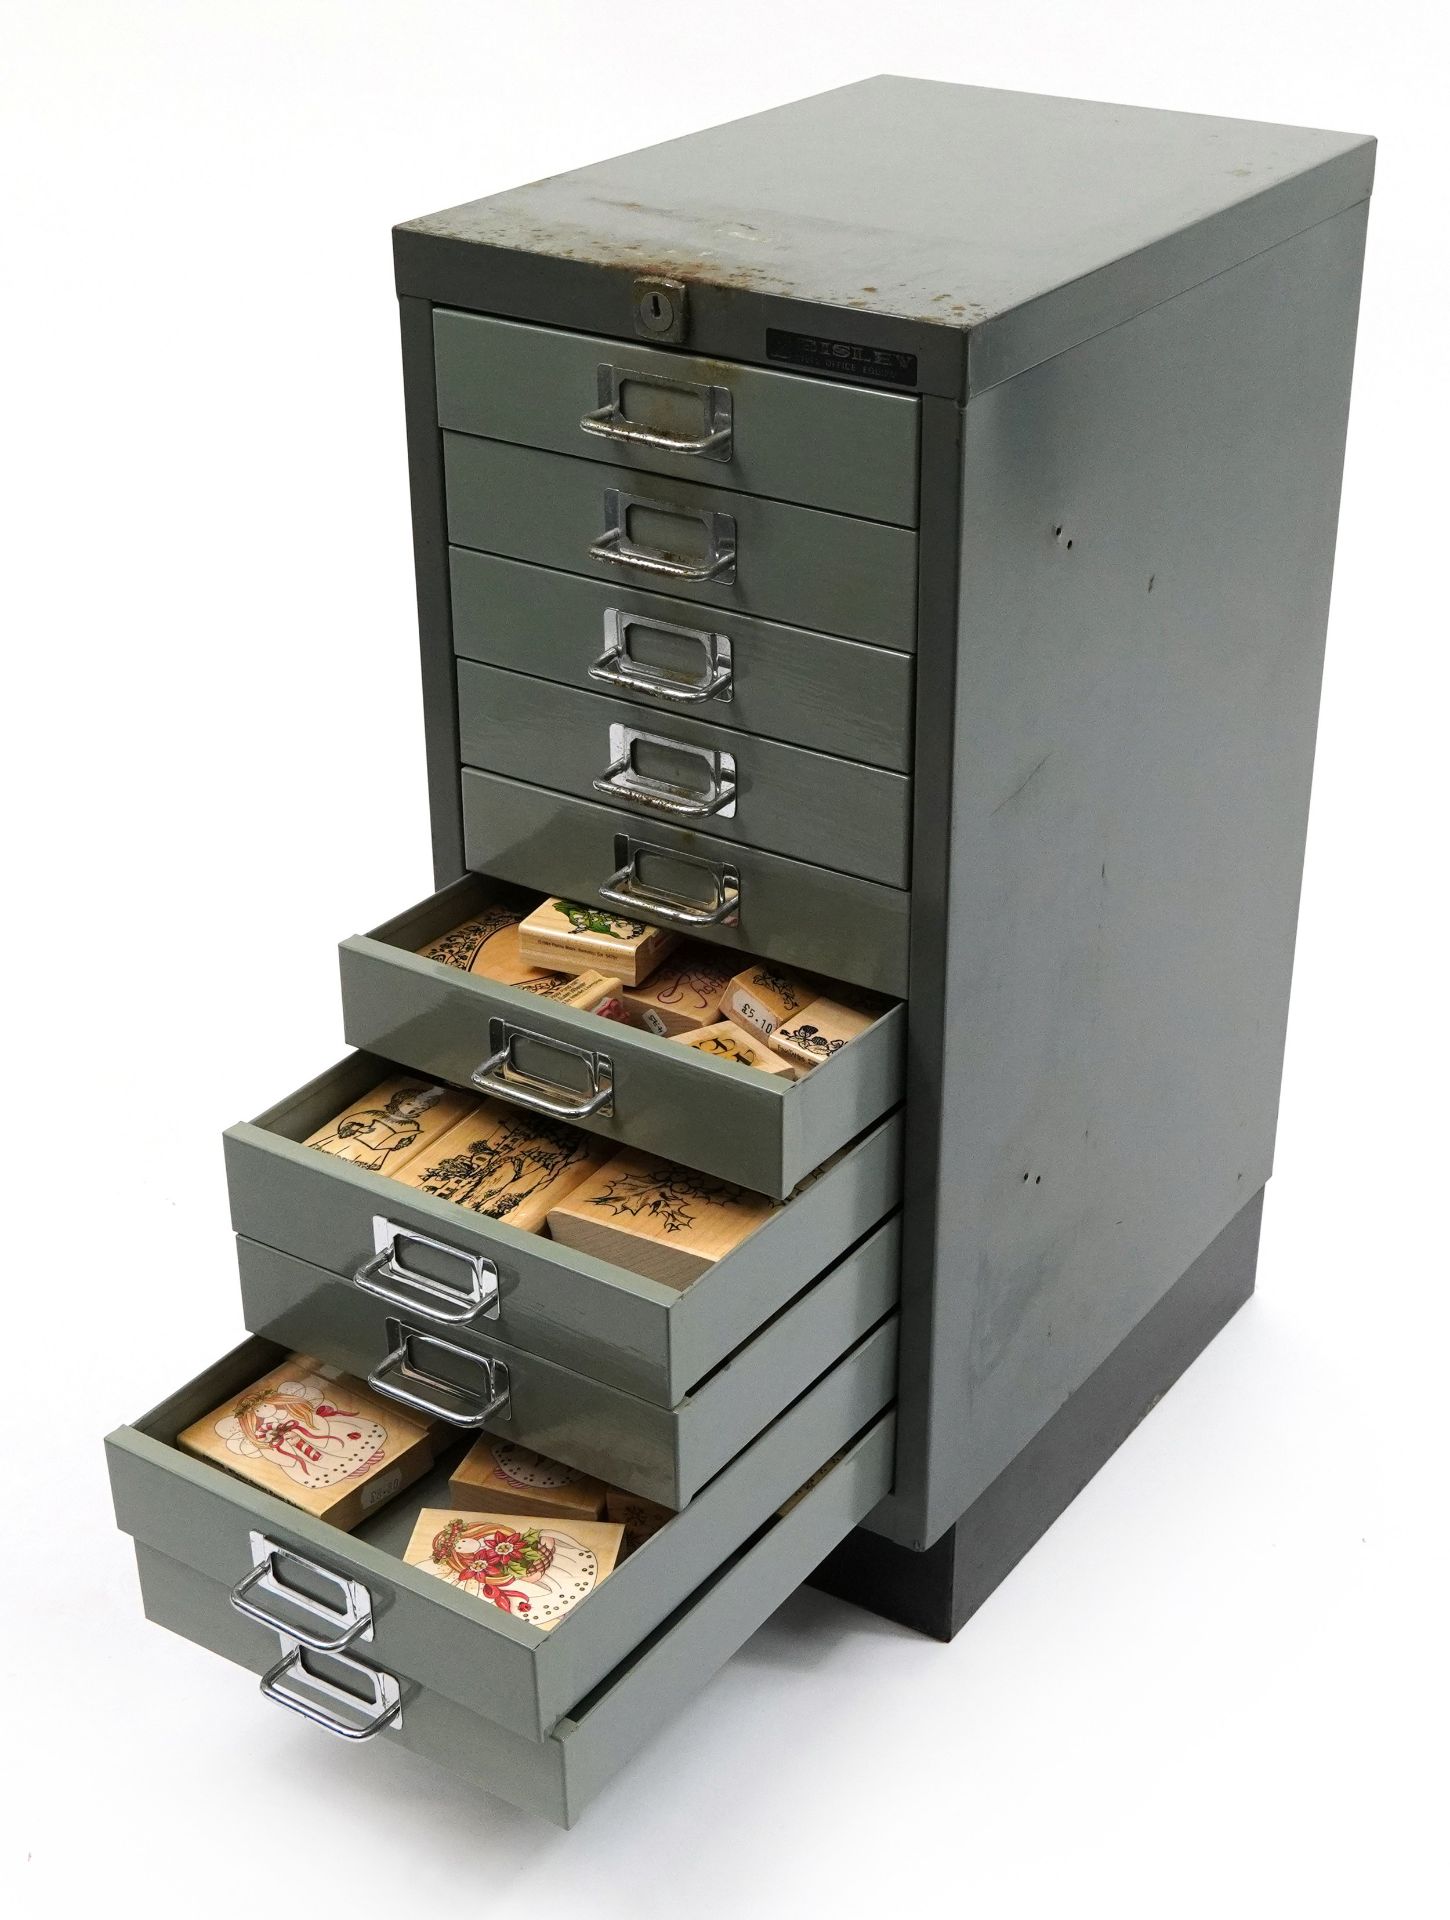 Large collection of wooden printing blocks and ink stamps housed in a Bisley ten drawer filing